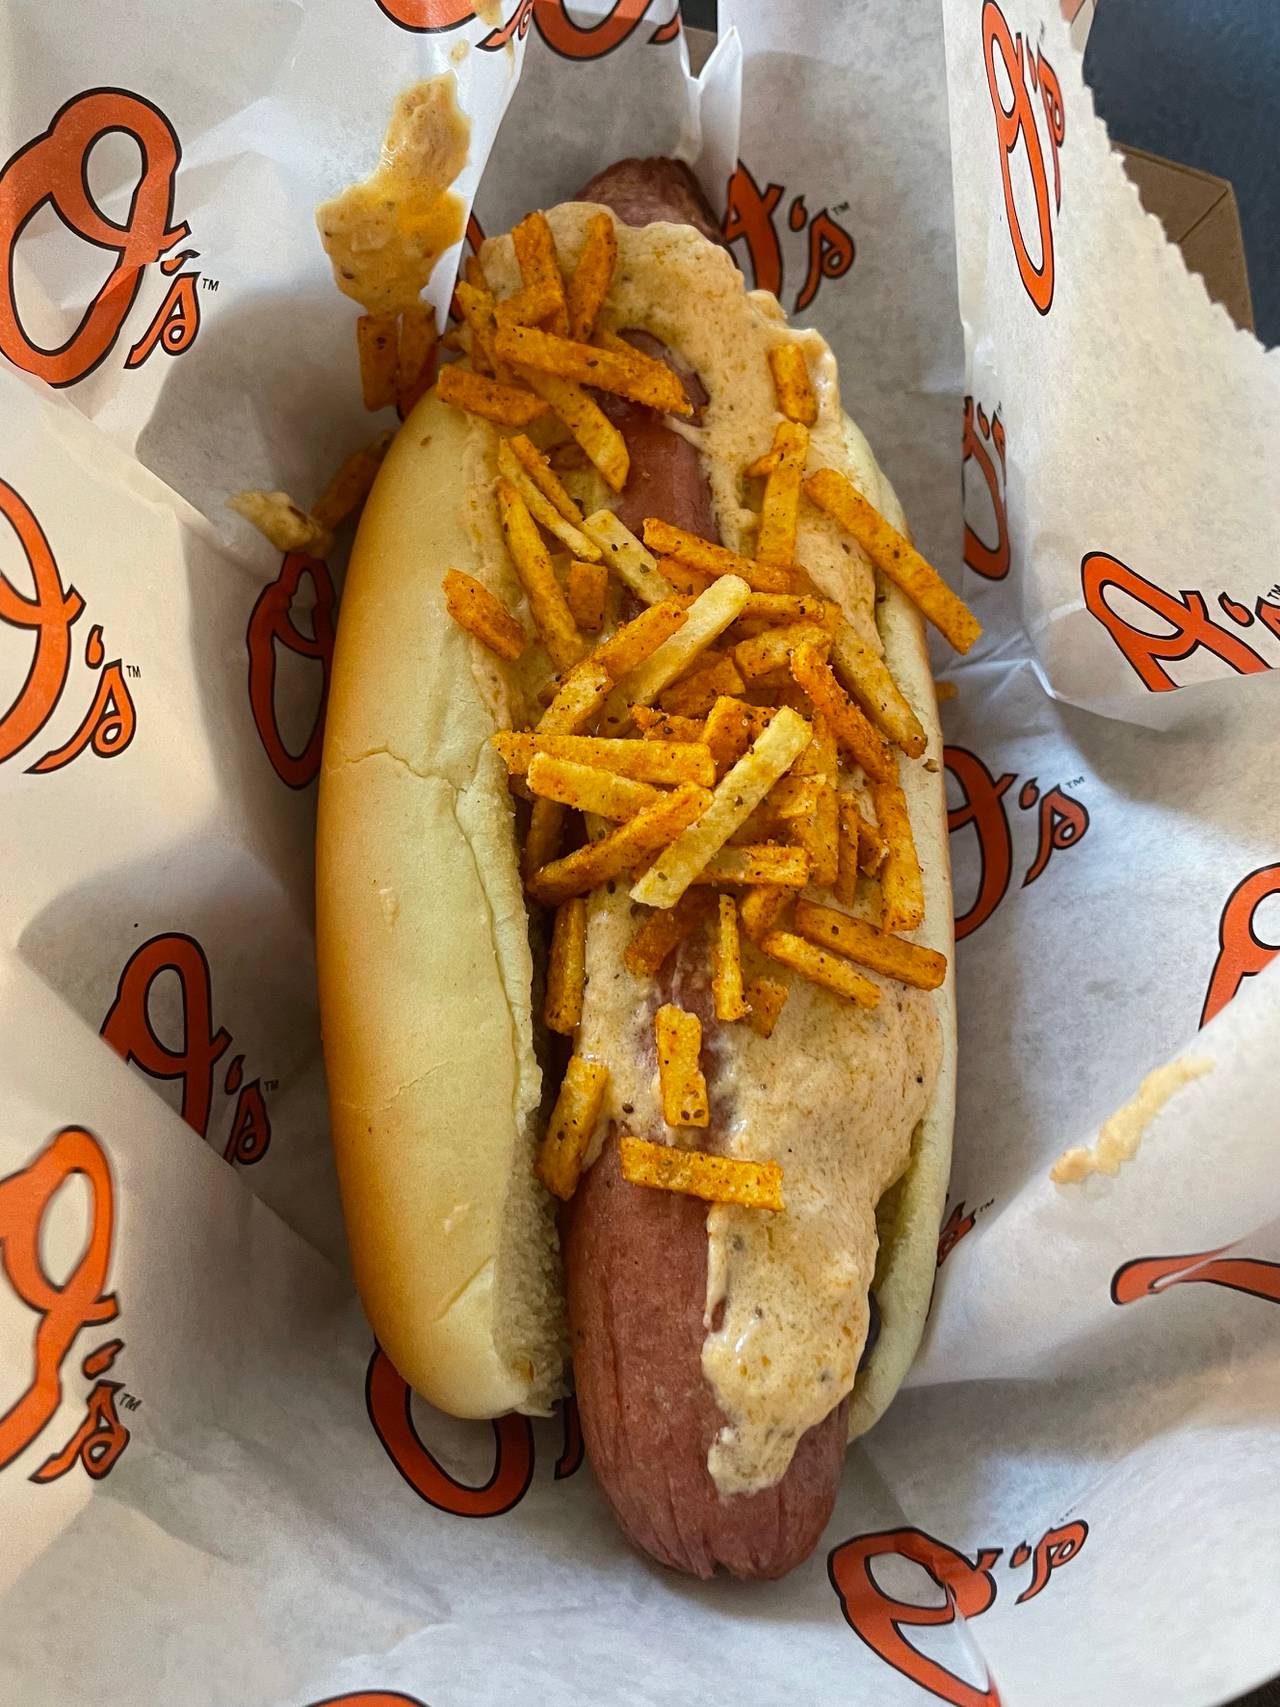 At a media preview, the Orioles and Levy Restaurants introduced a Yard Dog with three, footlong hot dogs topped with crab dip and potato sticks. The item was missing in action during a follow-up trip to the ballpark; in its place, the more down-to-earth Maryland Dog, which was a normal-sized hot dog topped with crab dip.